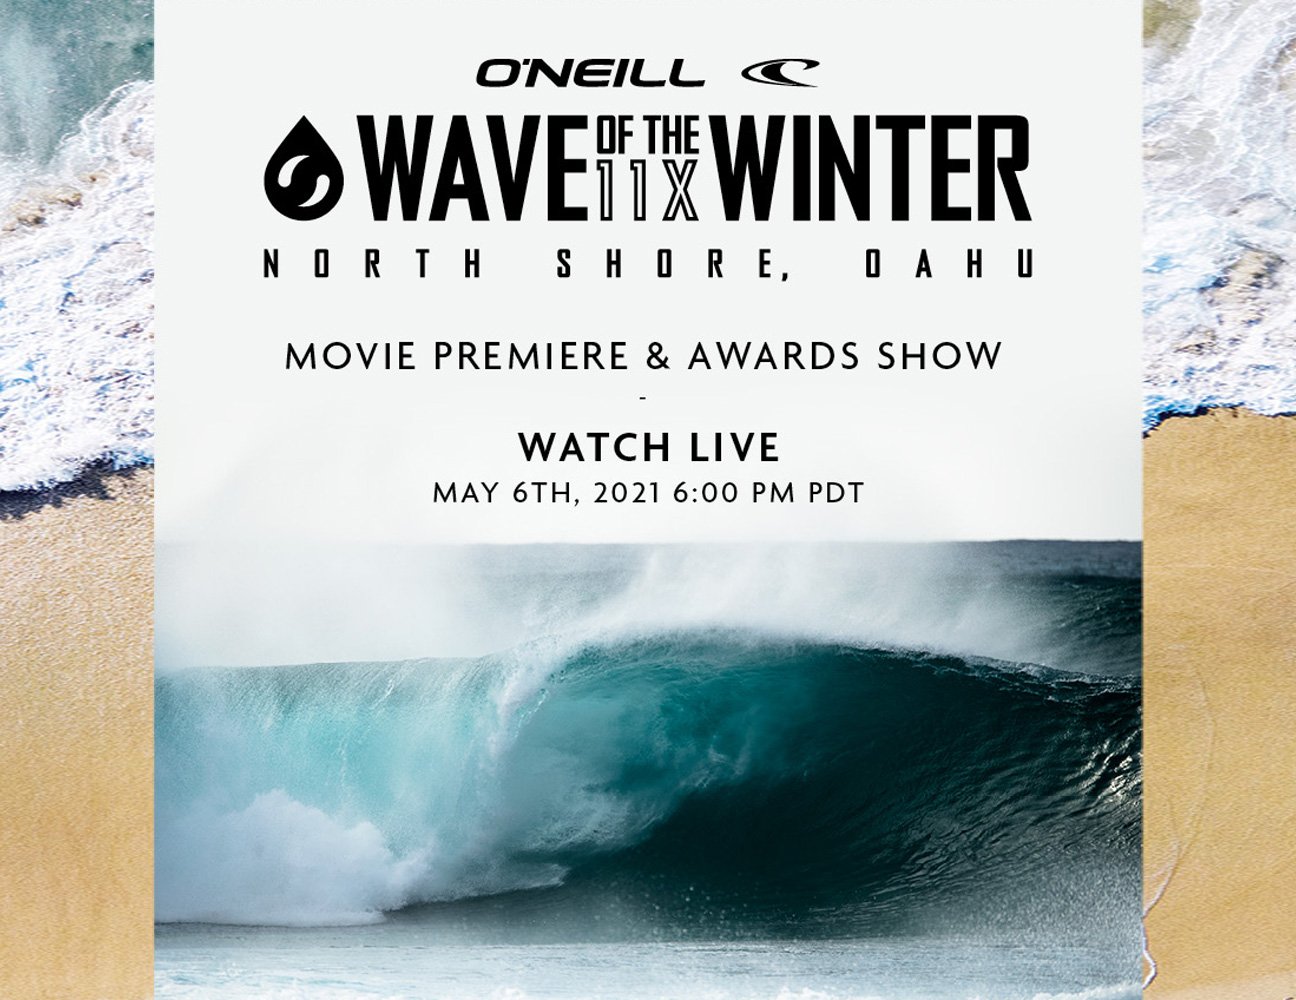 20/21 O'NEILL WAVE OF THE WINTER MOVIE & AWARDS - MAY 6TH